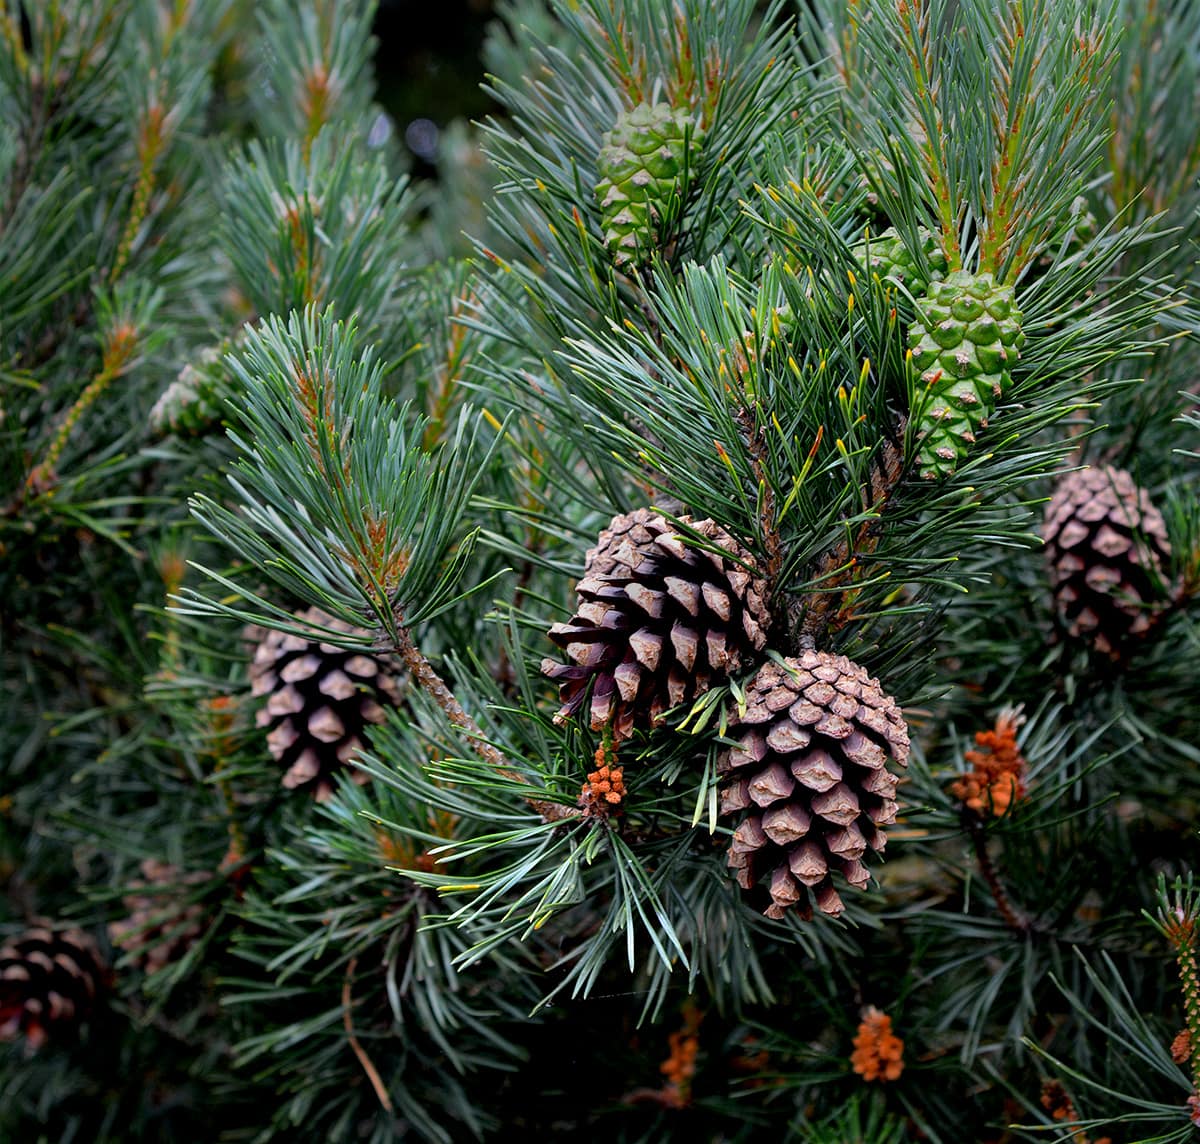 Several generations of Pine cones 